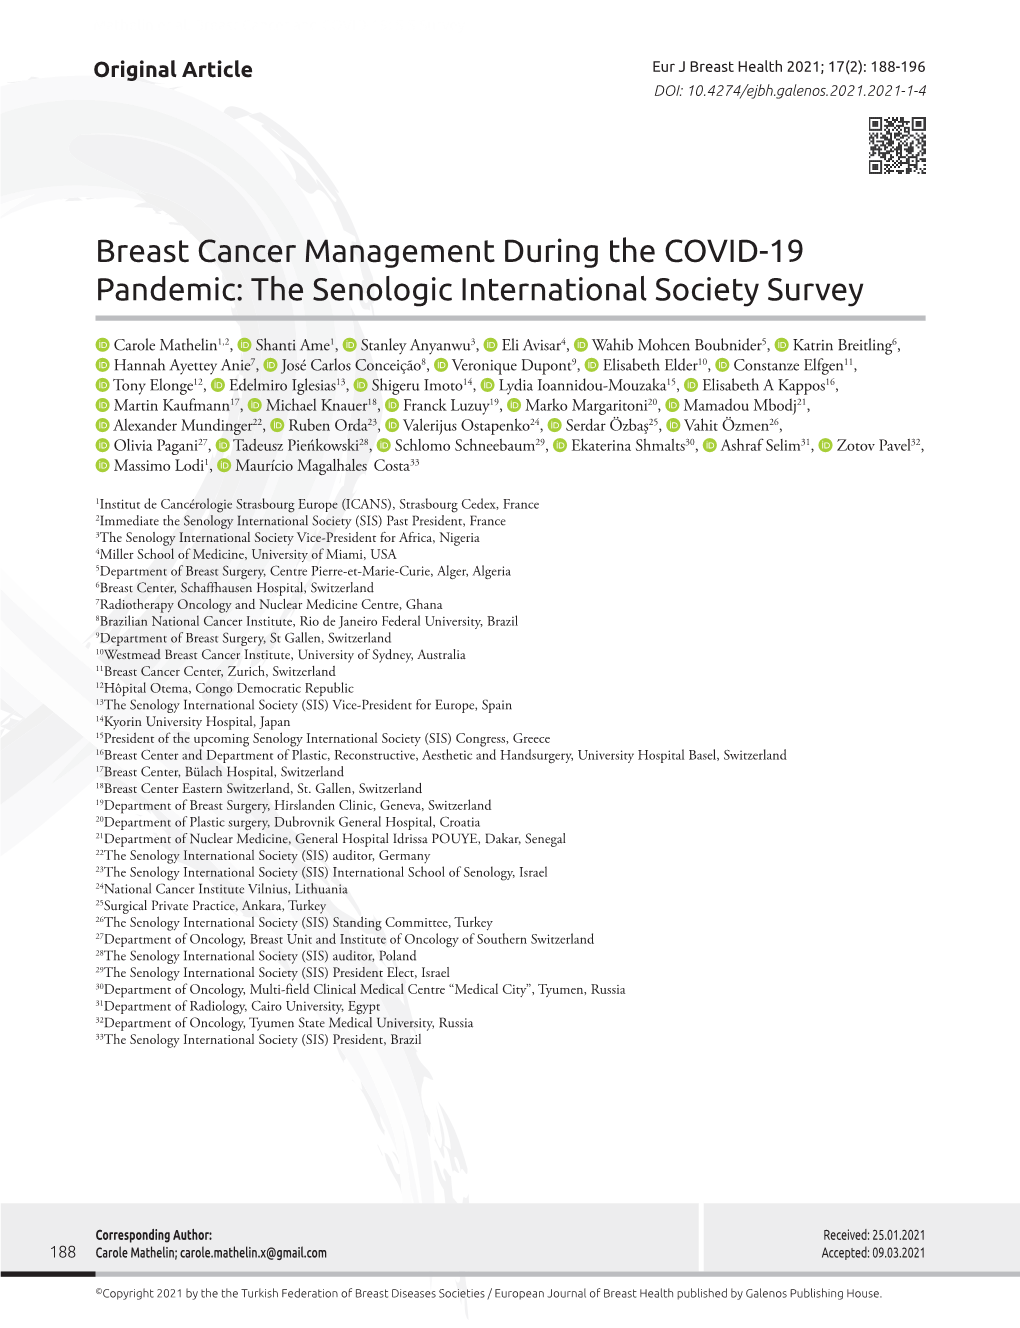 Breast Cancer Management During the COVID-19 Pandemic: the Senologic International Society Survey